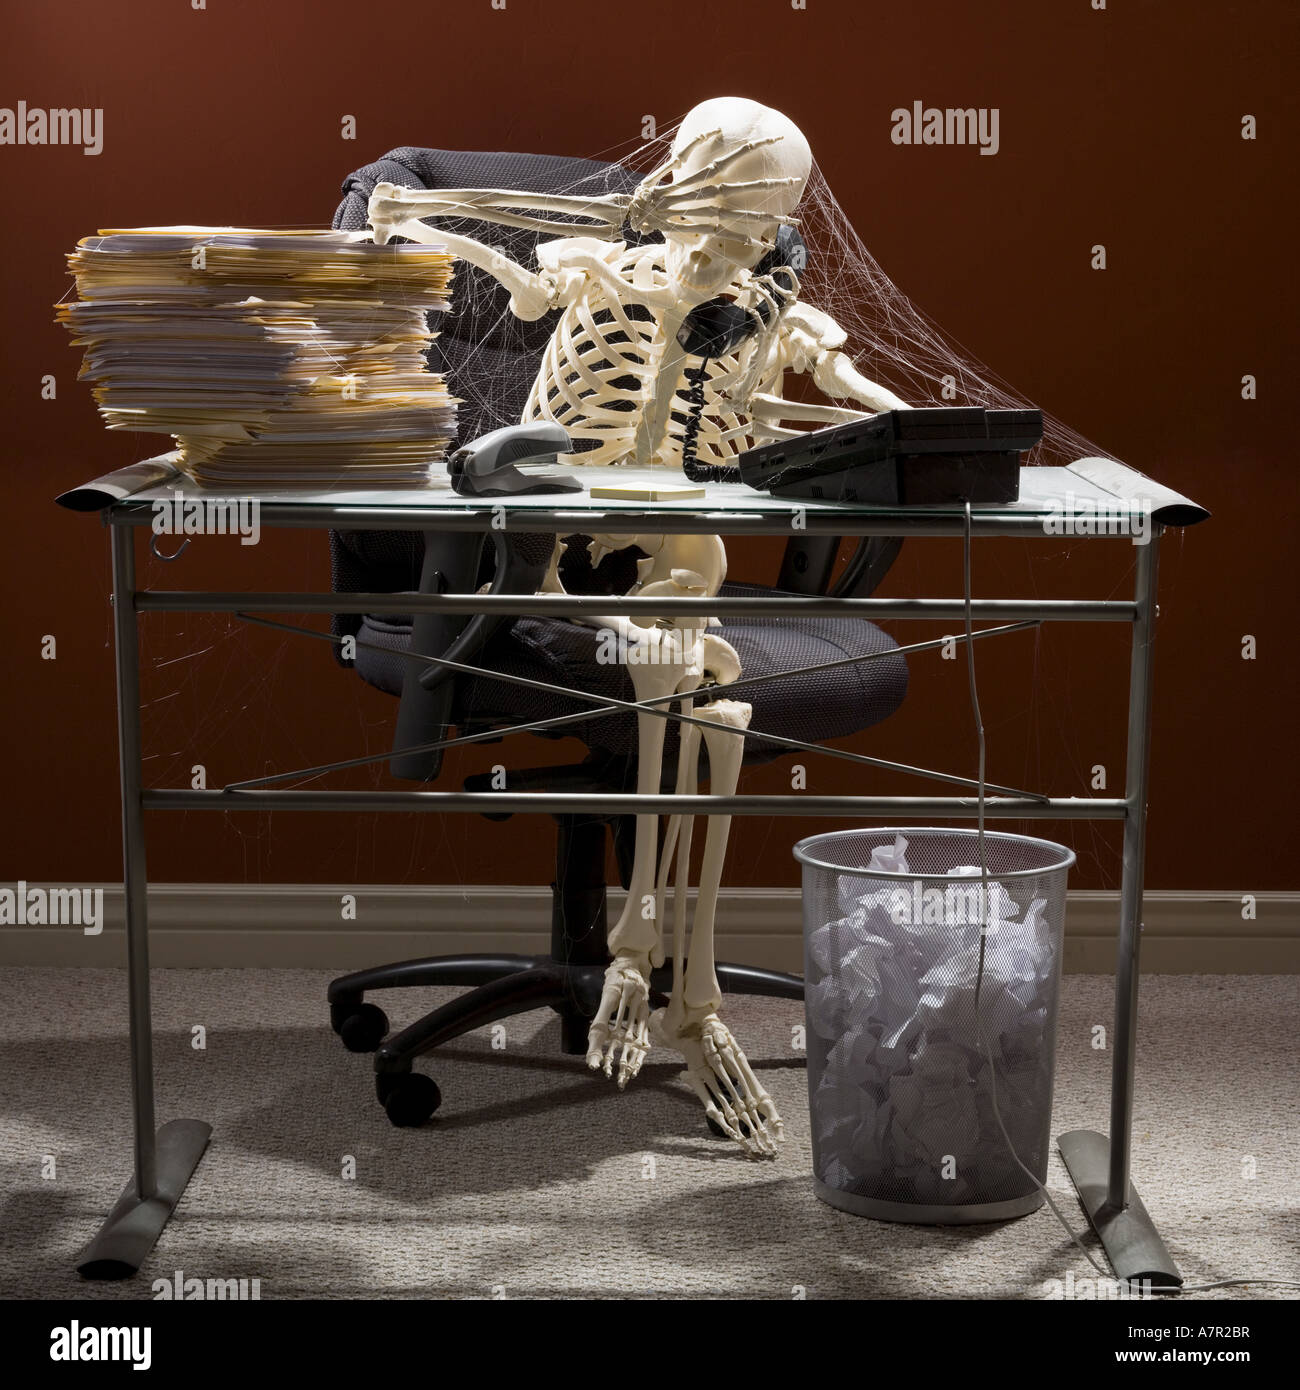 Skeleton Sitting At Desk Talking On Telephone With Webs And Stacks